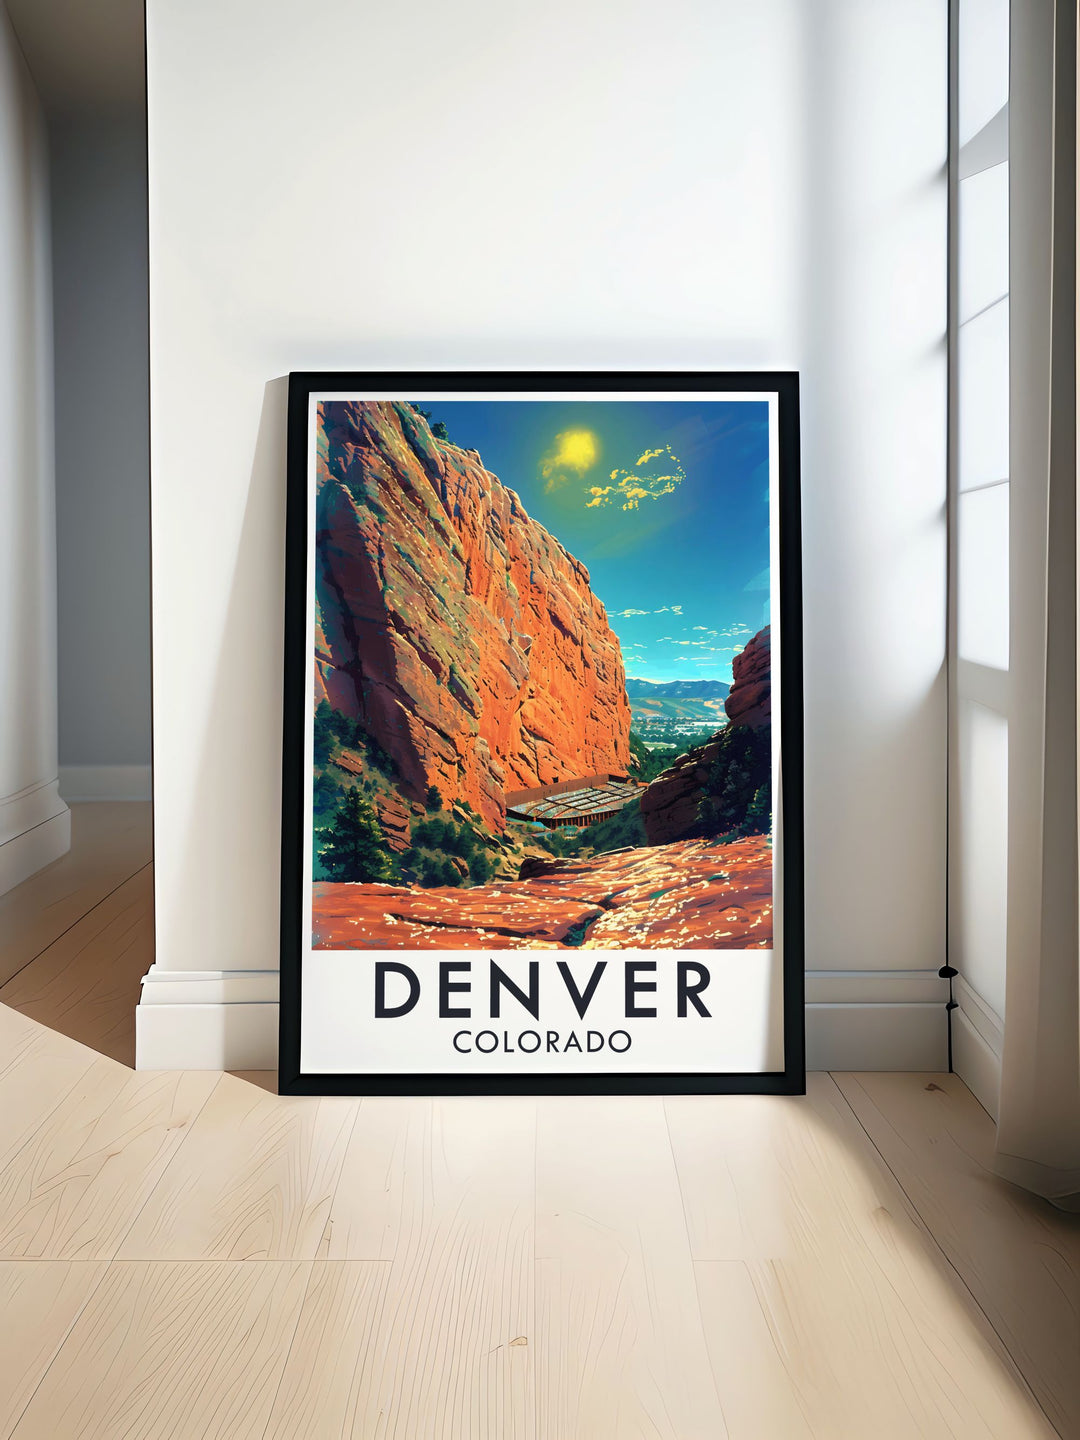 Boulder Colorado is brought to life in this travel poster, featuring its vibrant arts scene and stunning natural surroundings, perfect for any wall art collection.